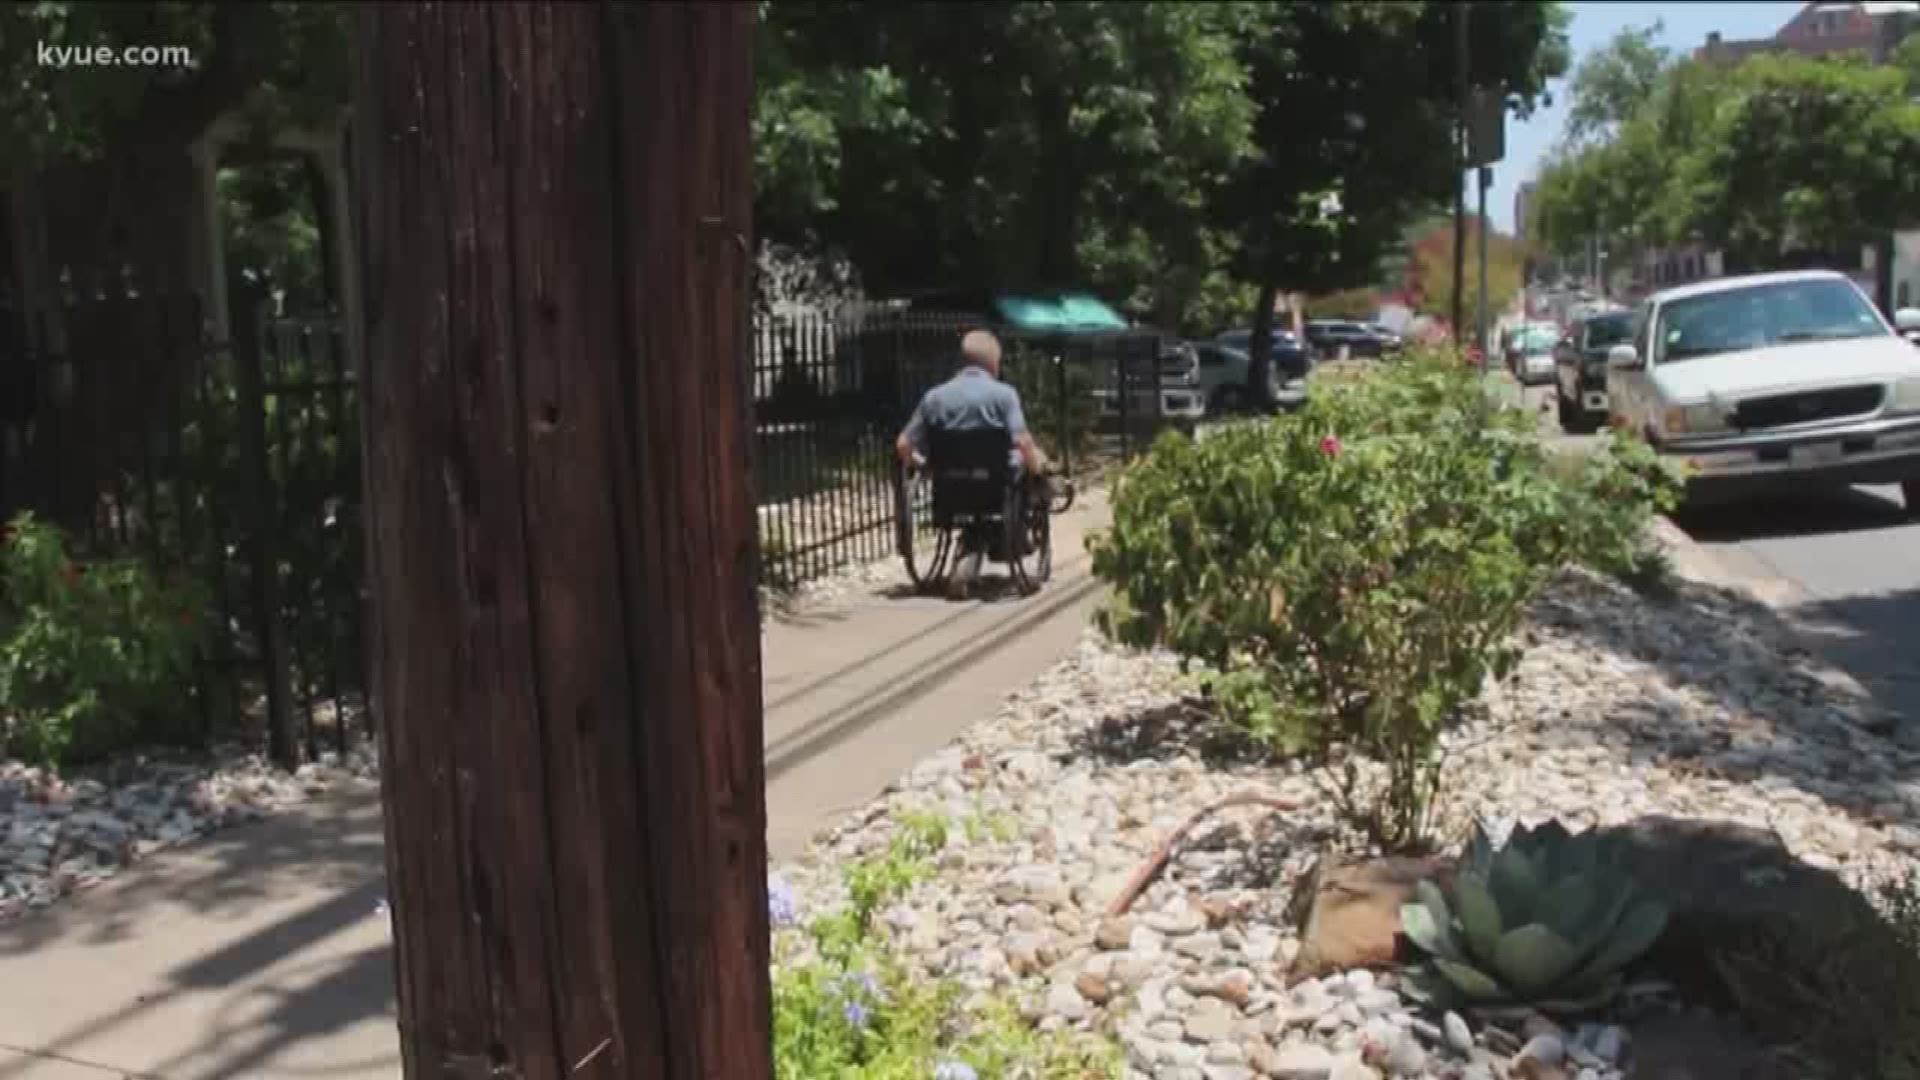 The KVUE Defenders have found that some of the sidewalks recently built in Austin haven't had the required inspections they need to make sure everyone can use them.